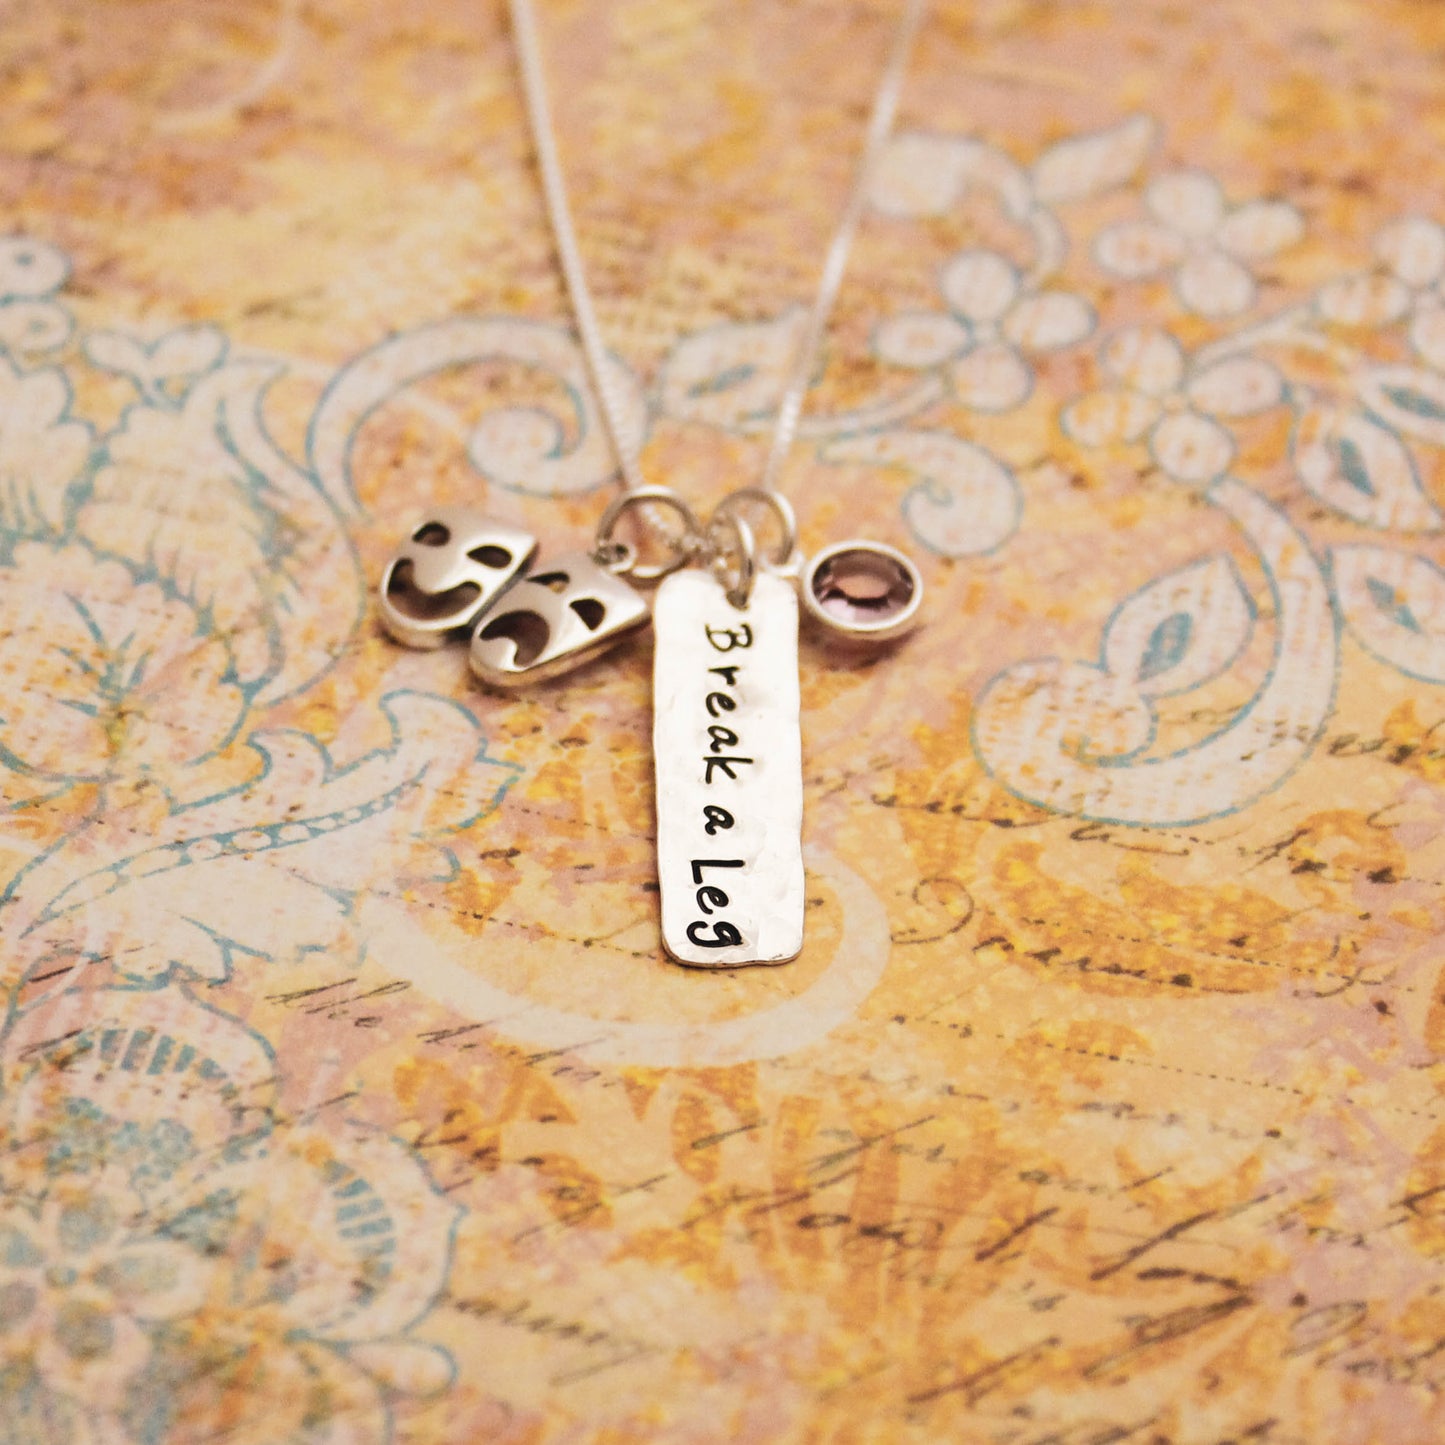 Break A Leg Theater Actor Necklace, Personalized Theater Acting Necklace, Comedy Tragedy Charm Sterling Silver Personalized Hand Stamped